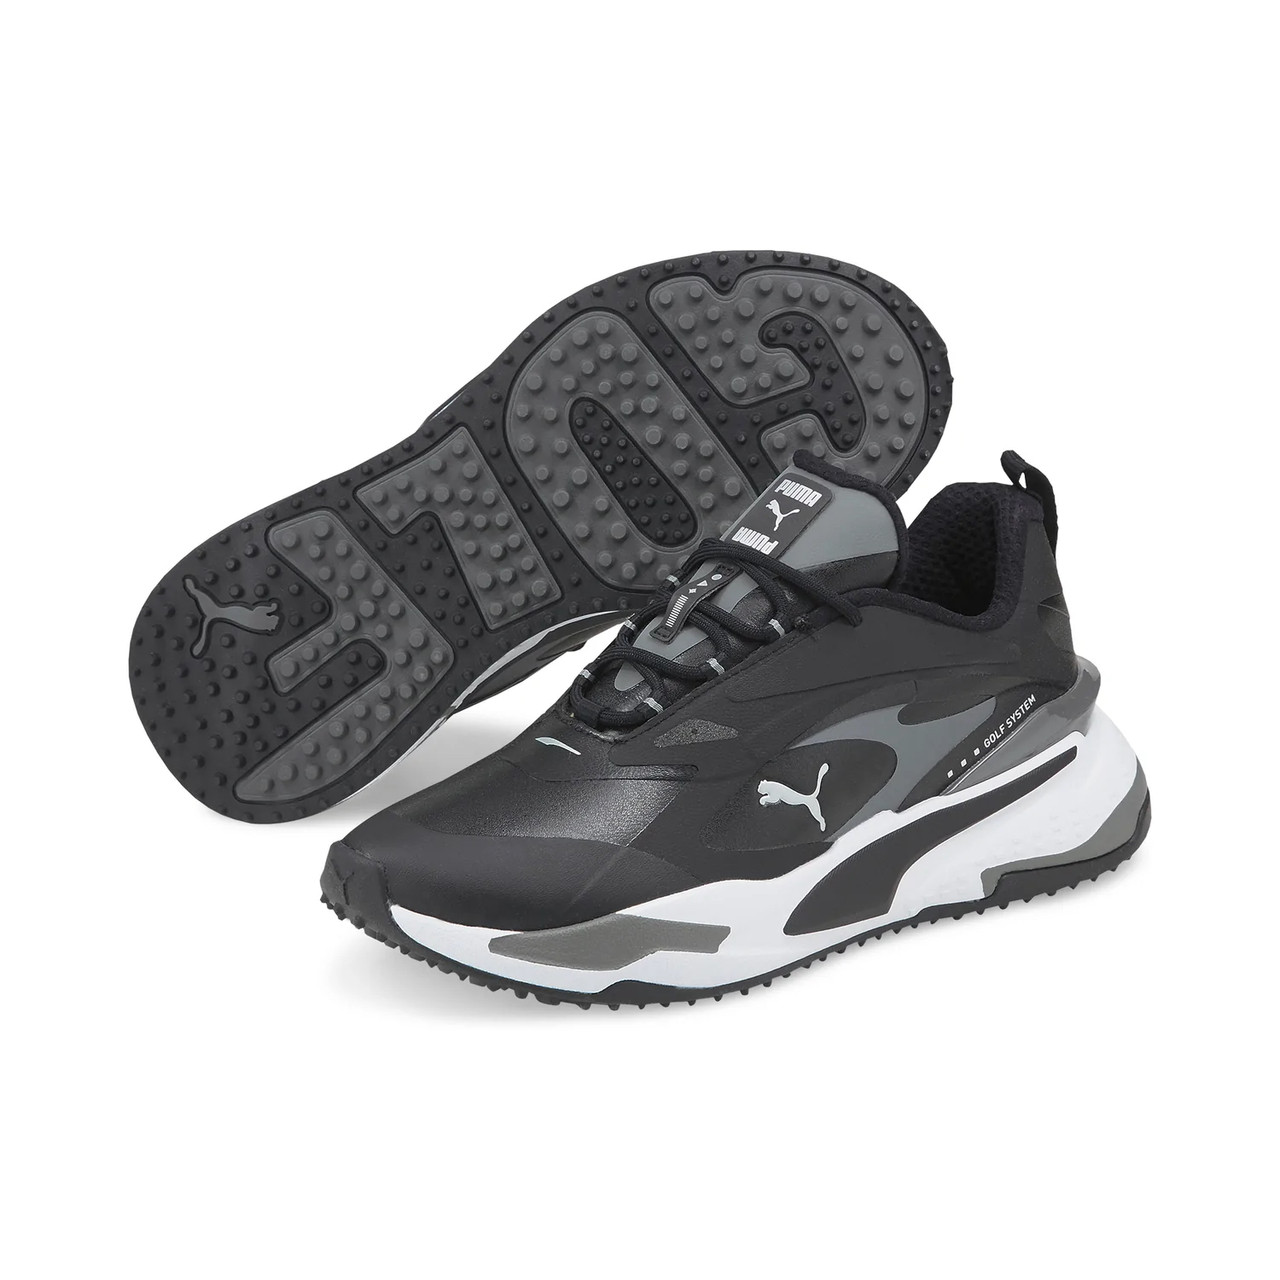 Are Puma Golf Shoes Waterproof?